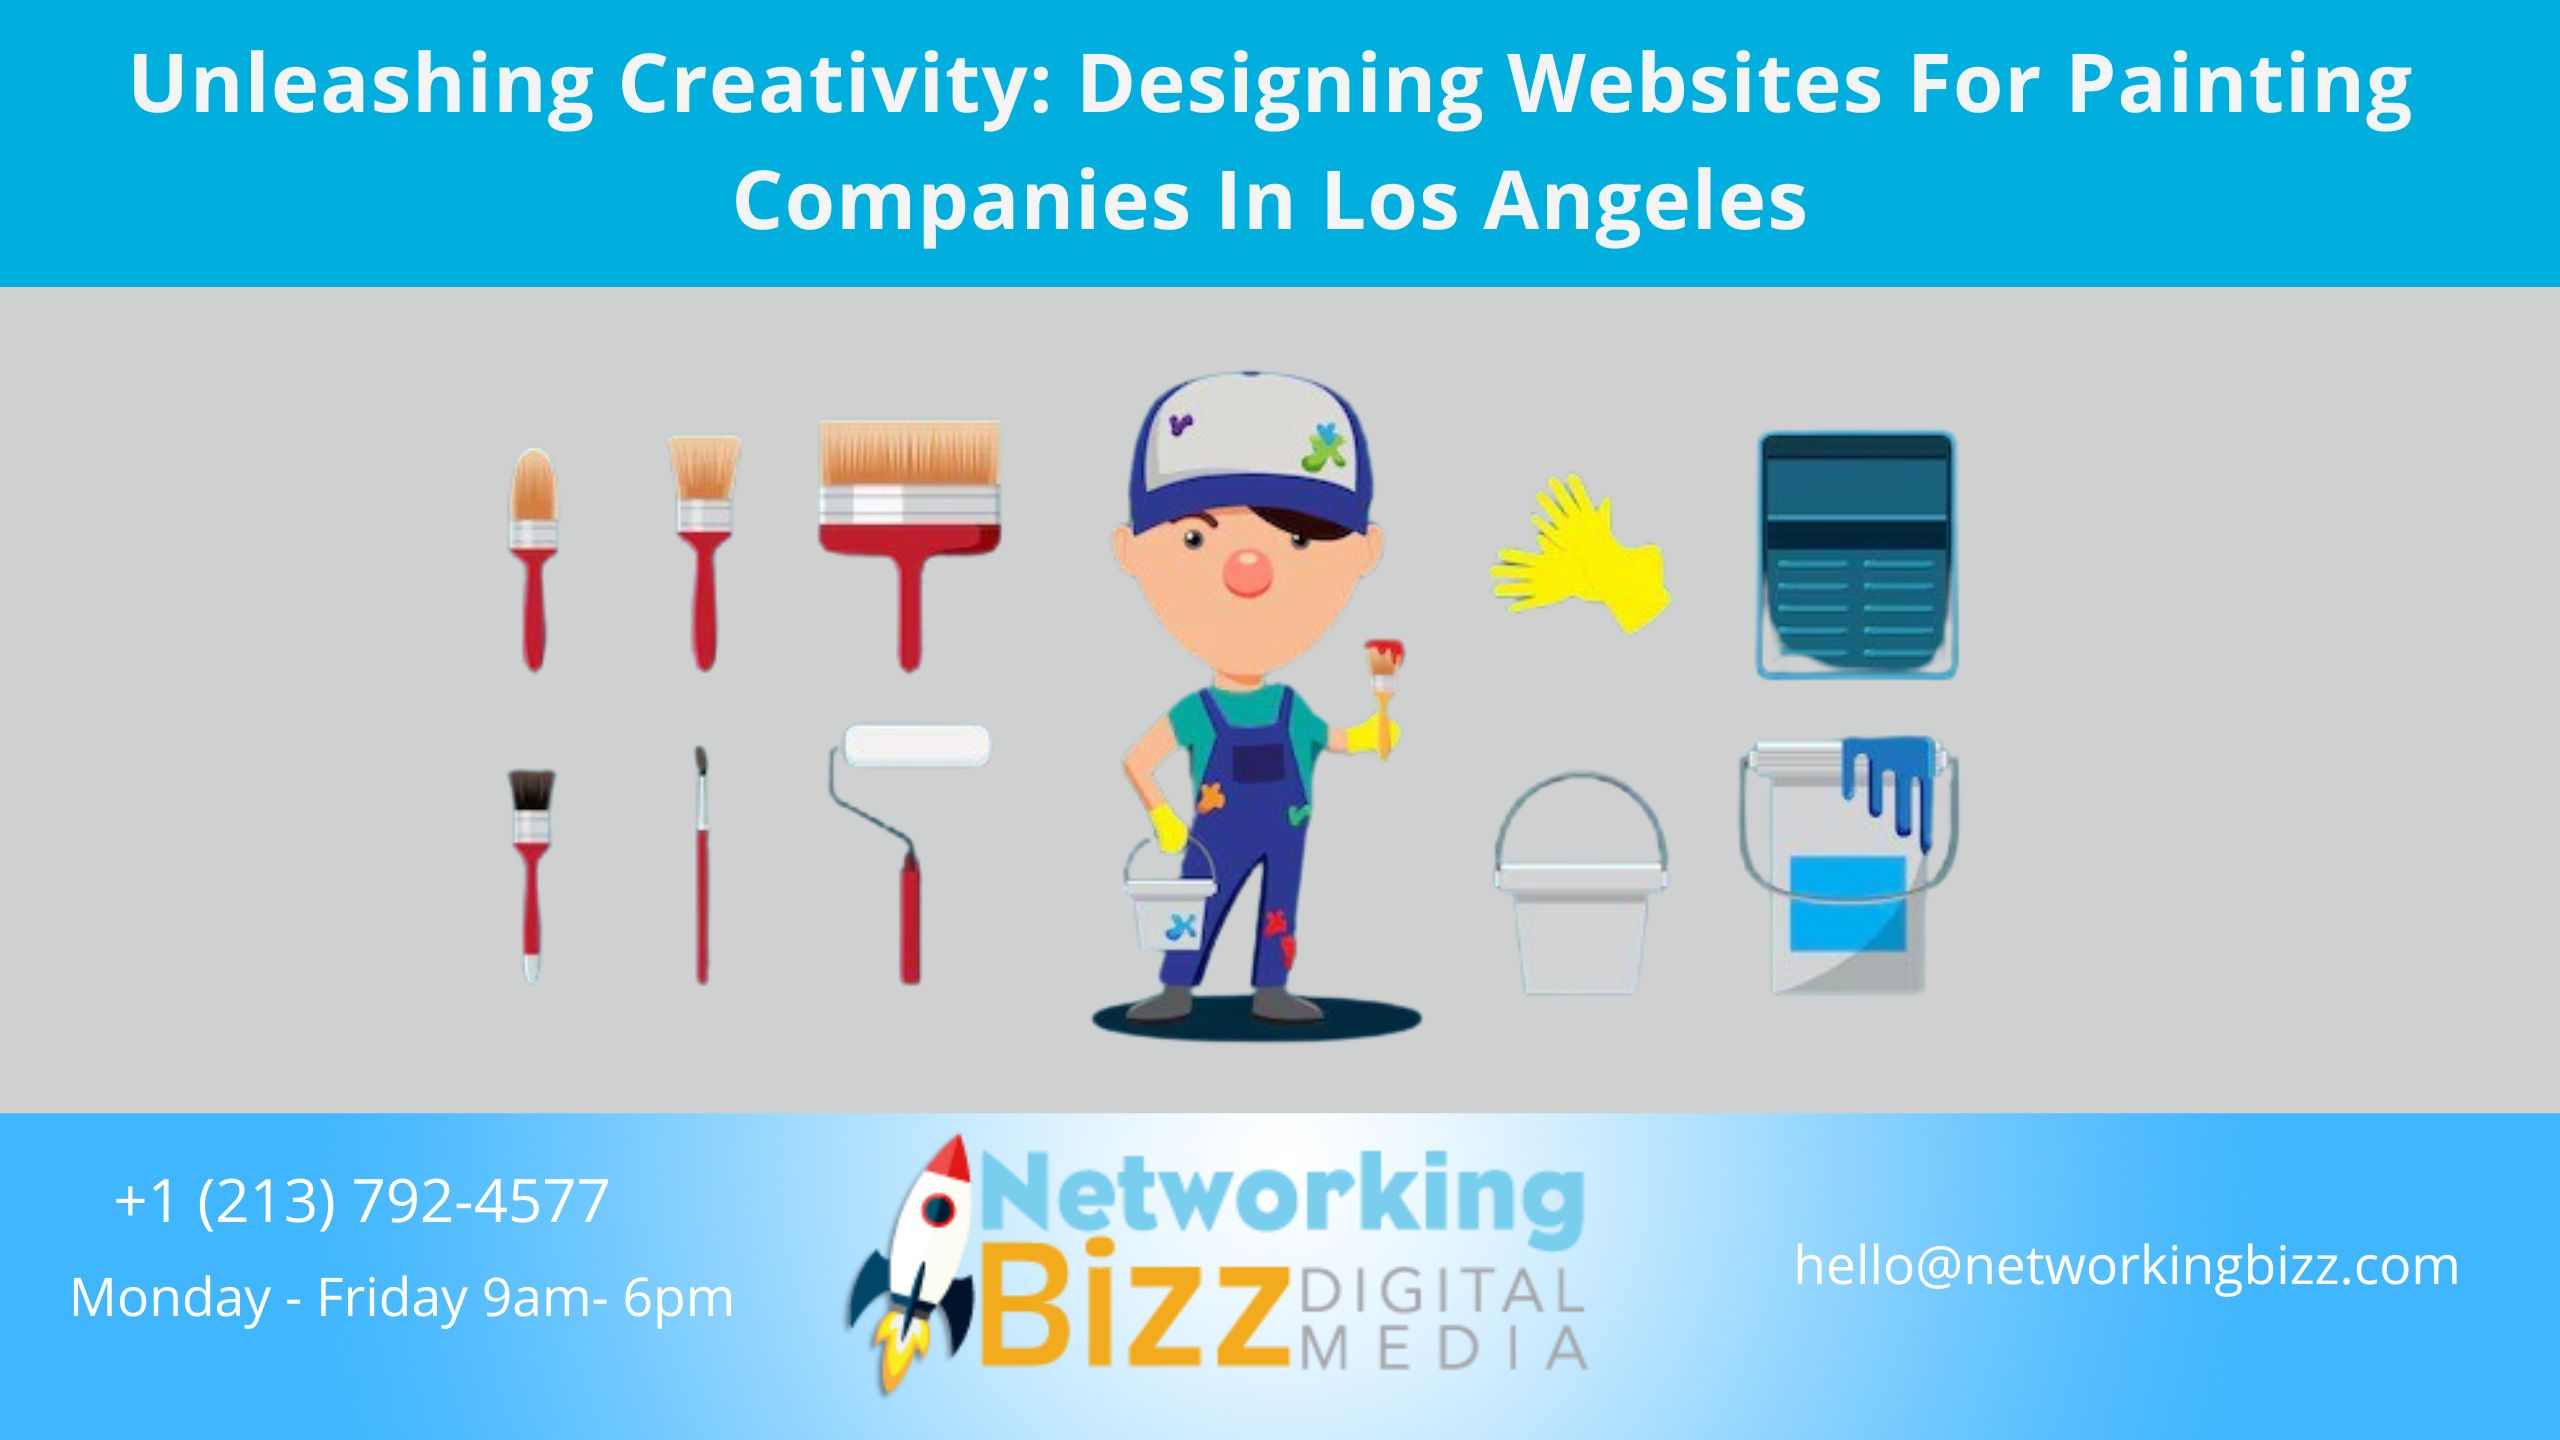 Unleashing Creativity: Designing Websites For Painting Companies In Los Angeles